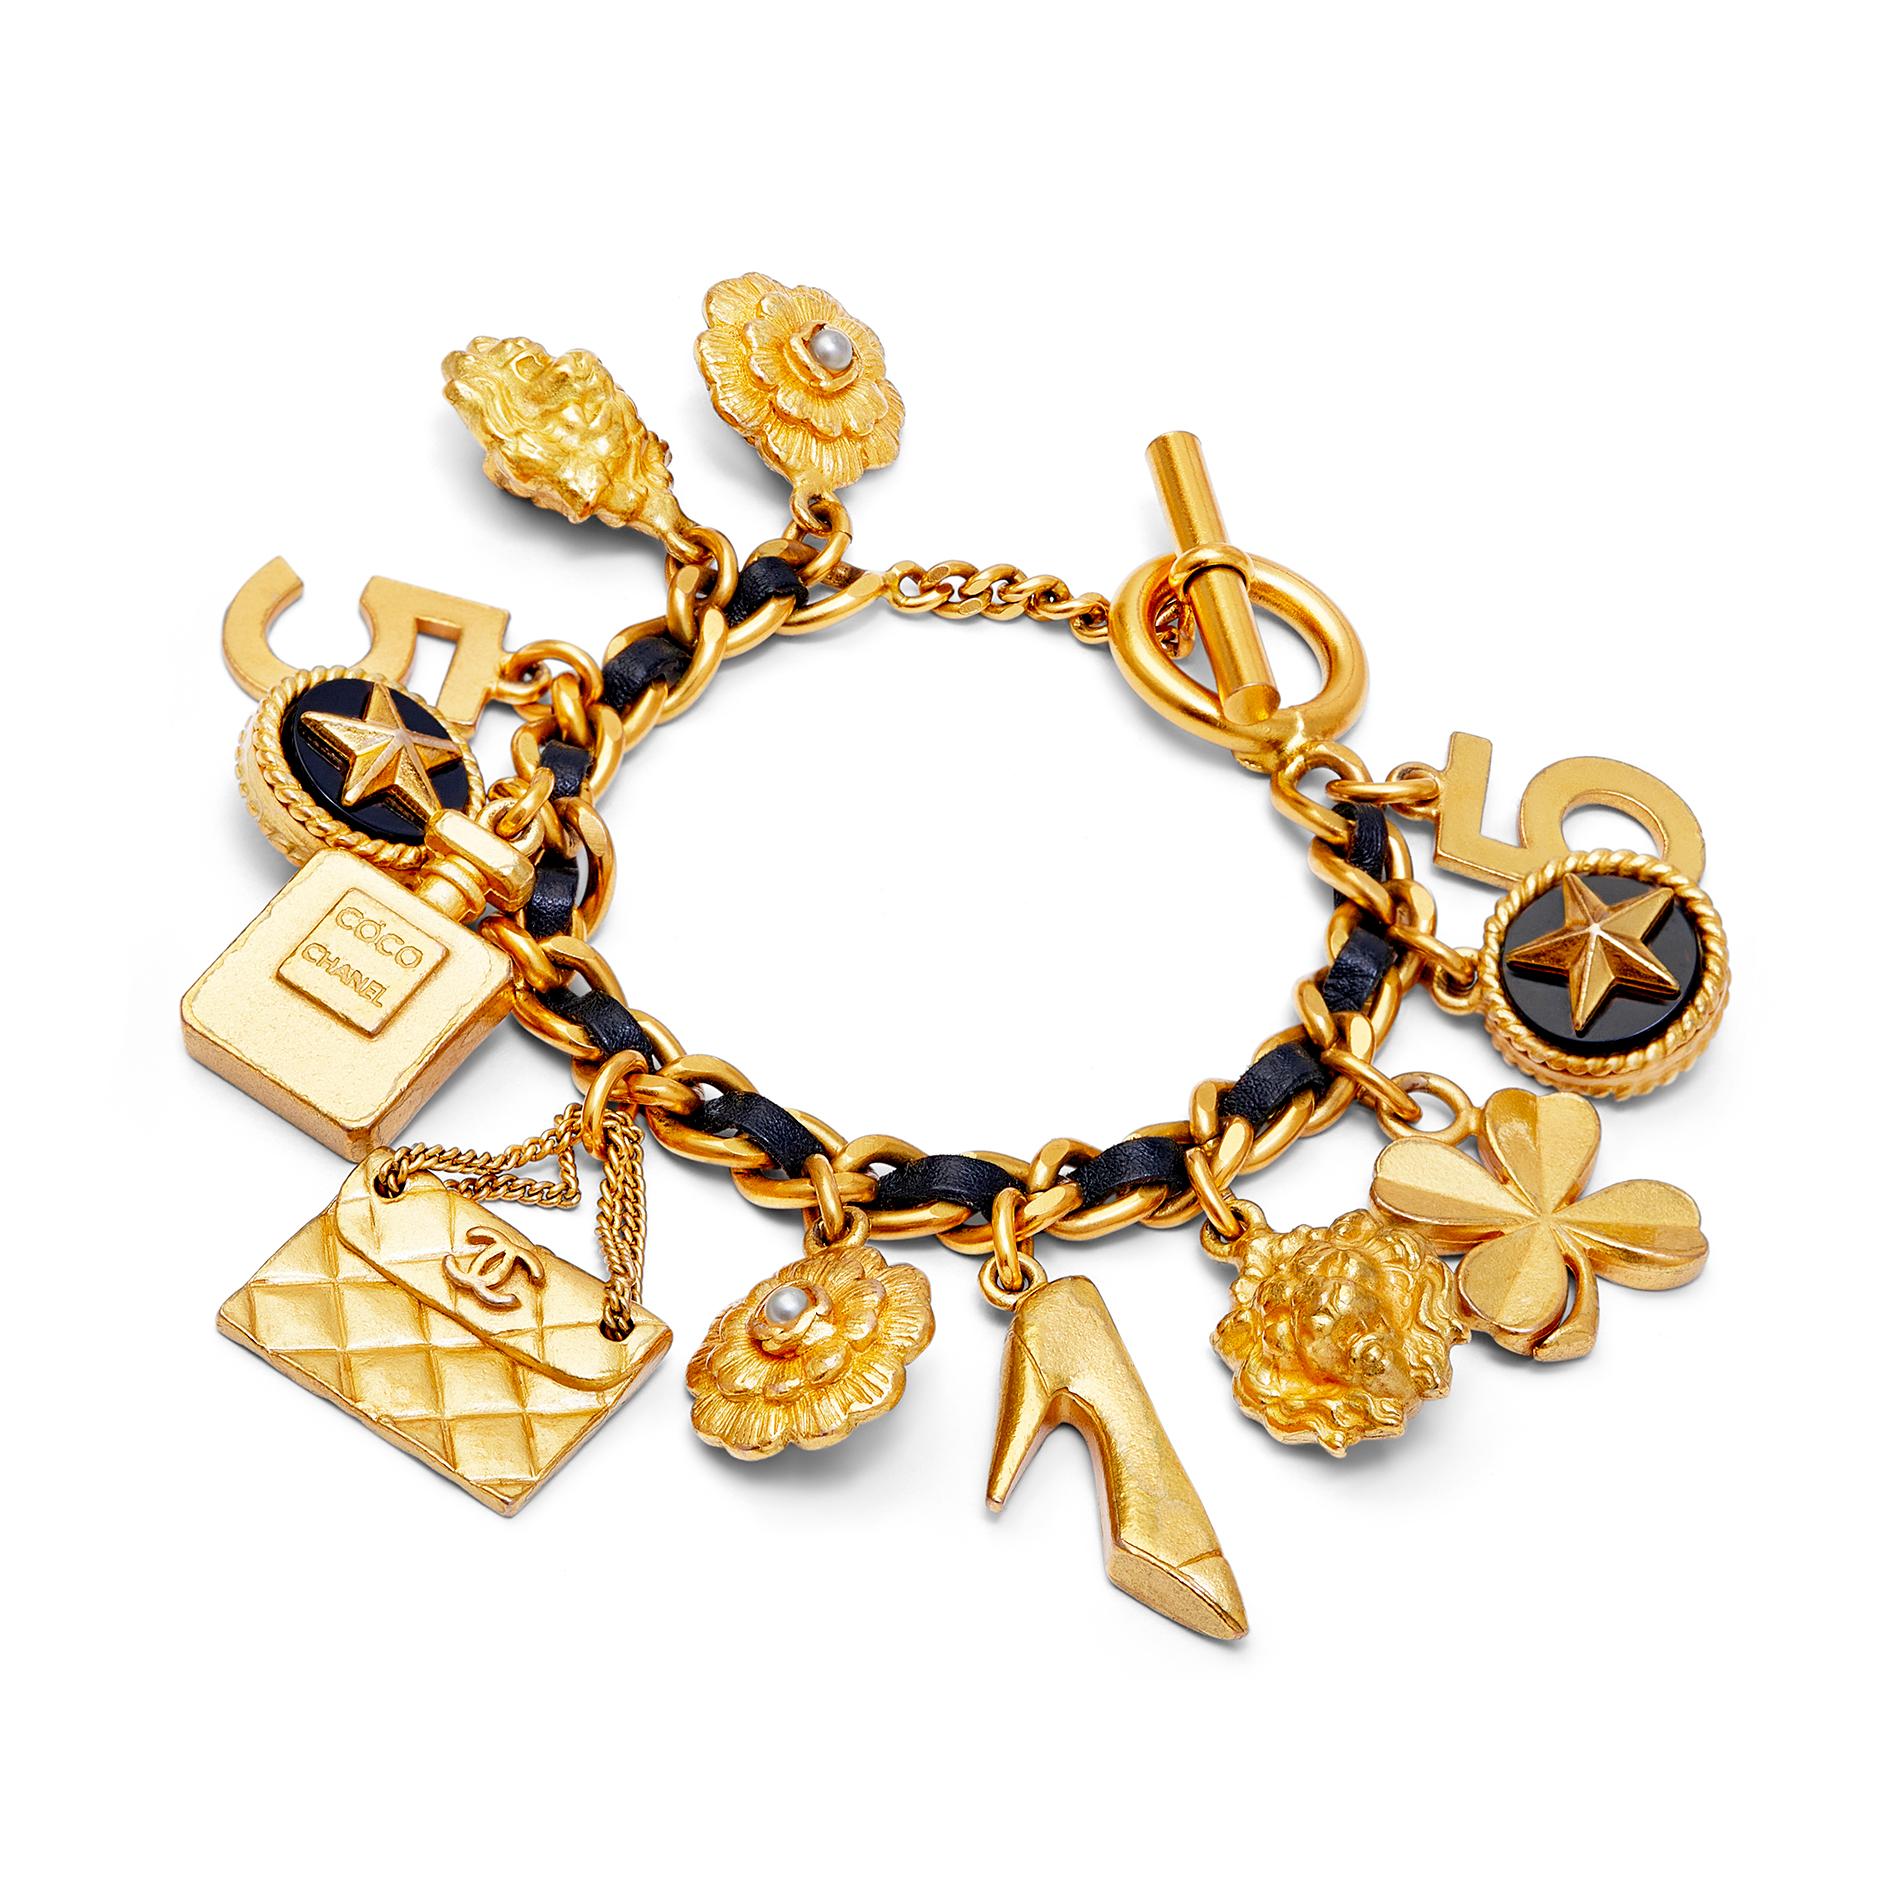 1990s Chanel gold-toned metal and black leather bracelet with the House's famous charms including: camellia flower with pearl centre, classic quilted handbag, monochrome court shoe, perfume bottle, 4-leaf clover, lion head, 5-point star and iconic